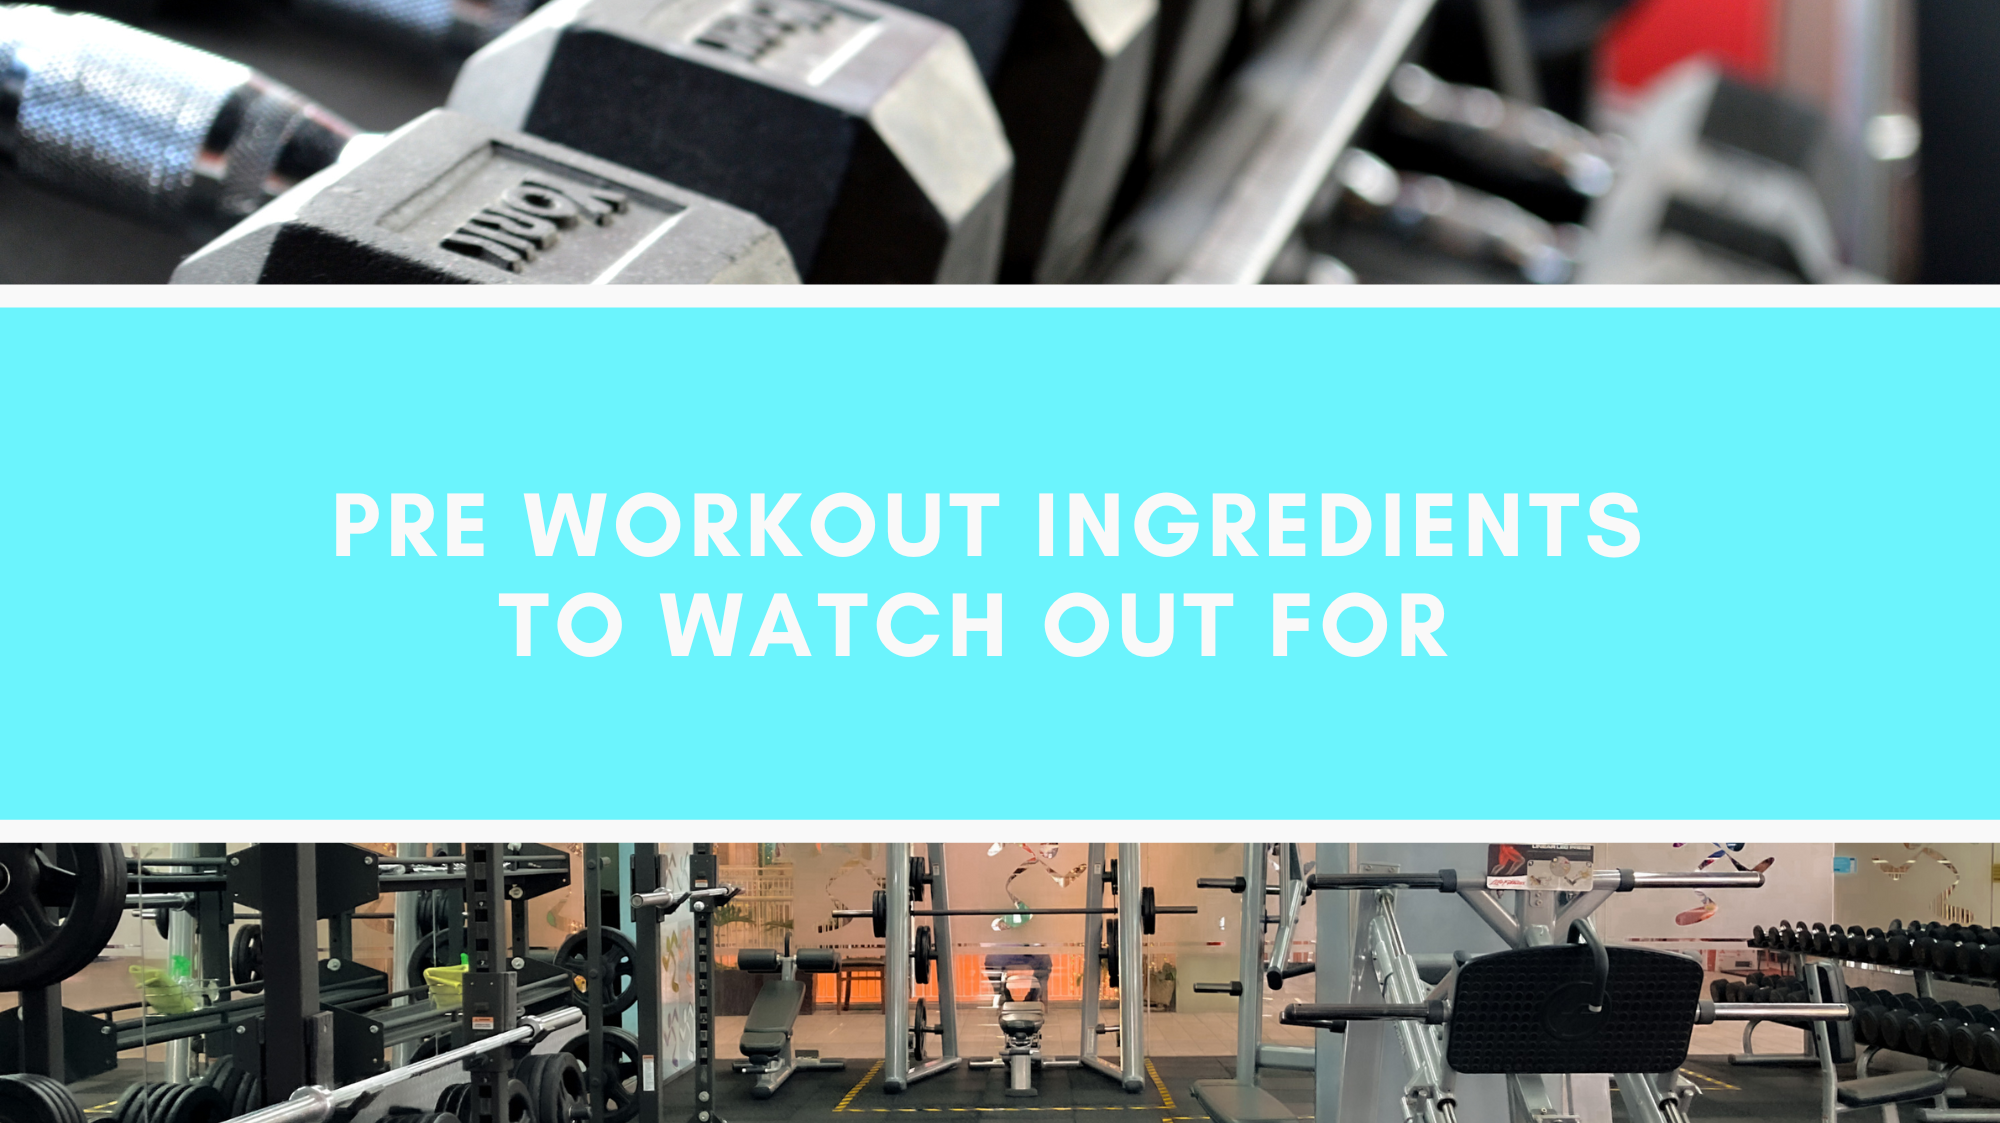 Pre Workout Ingredients to Watch Out For